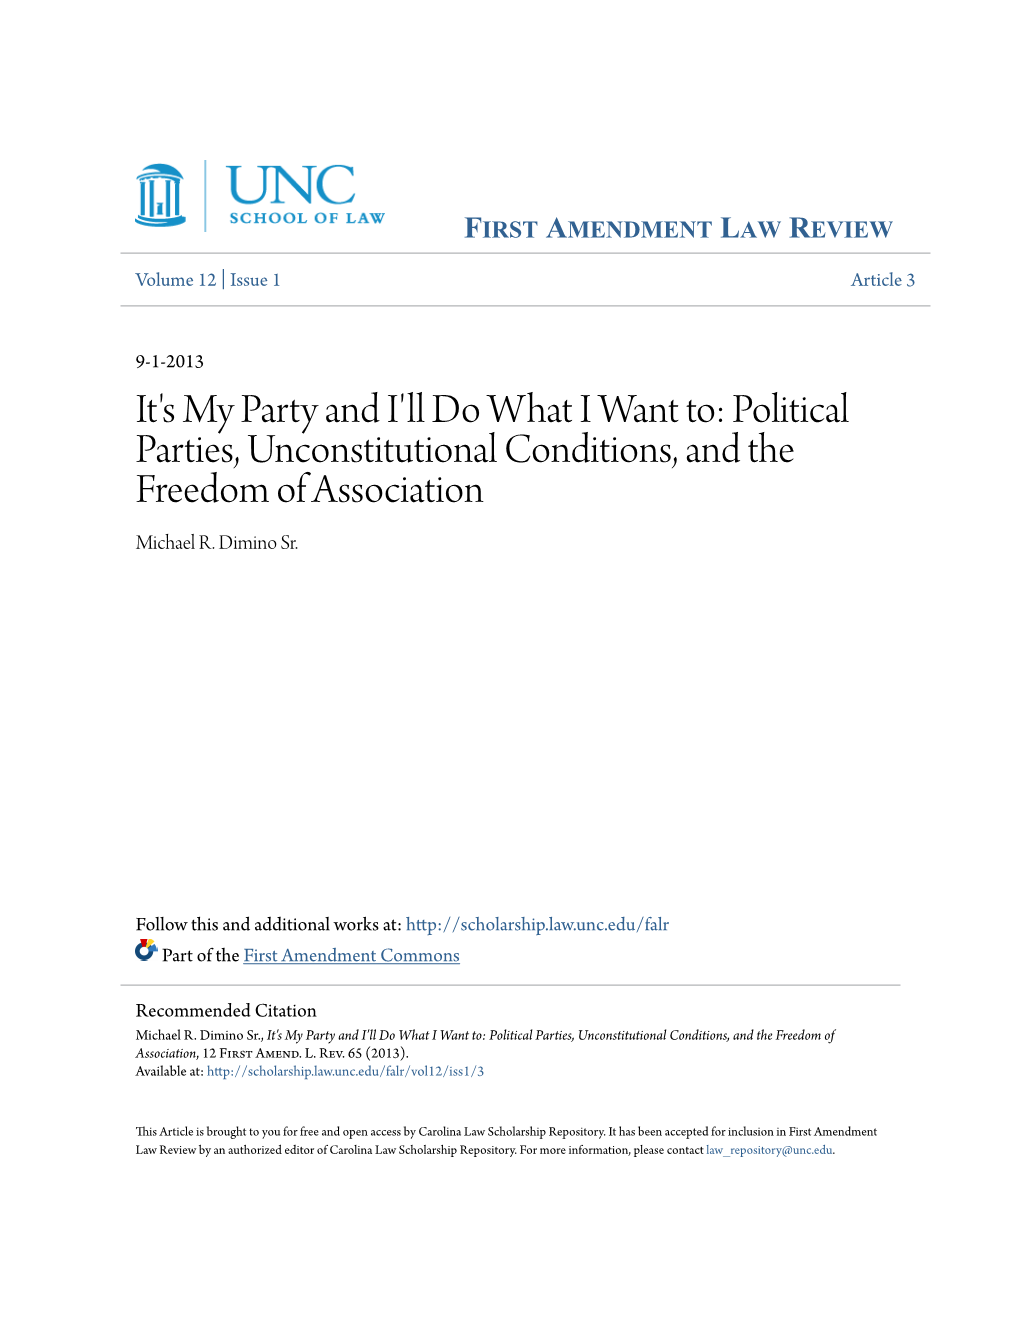 It's My Party and I'll Do What I Want To: Political Parties, Unconstitutional Conditions, and the Freedom of Association Michael R